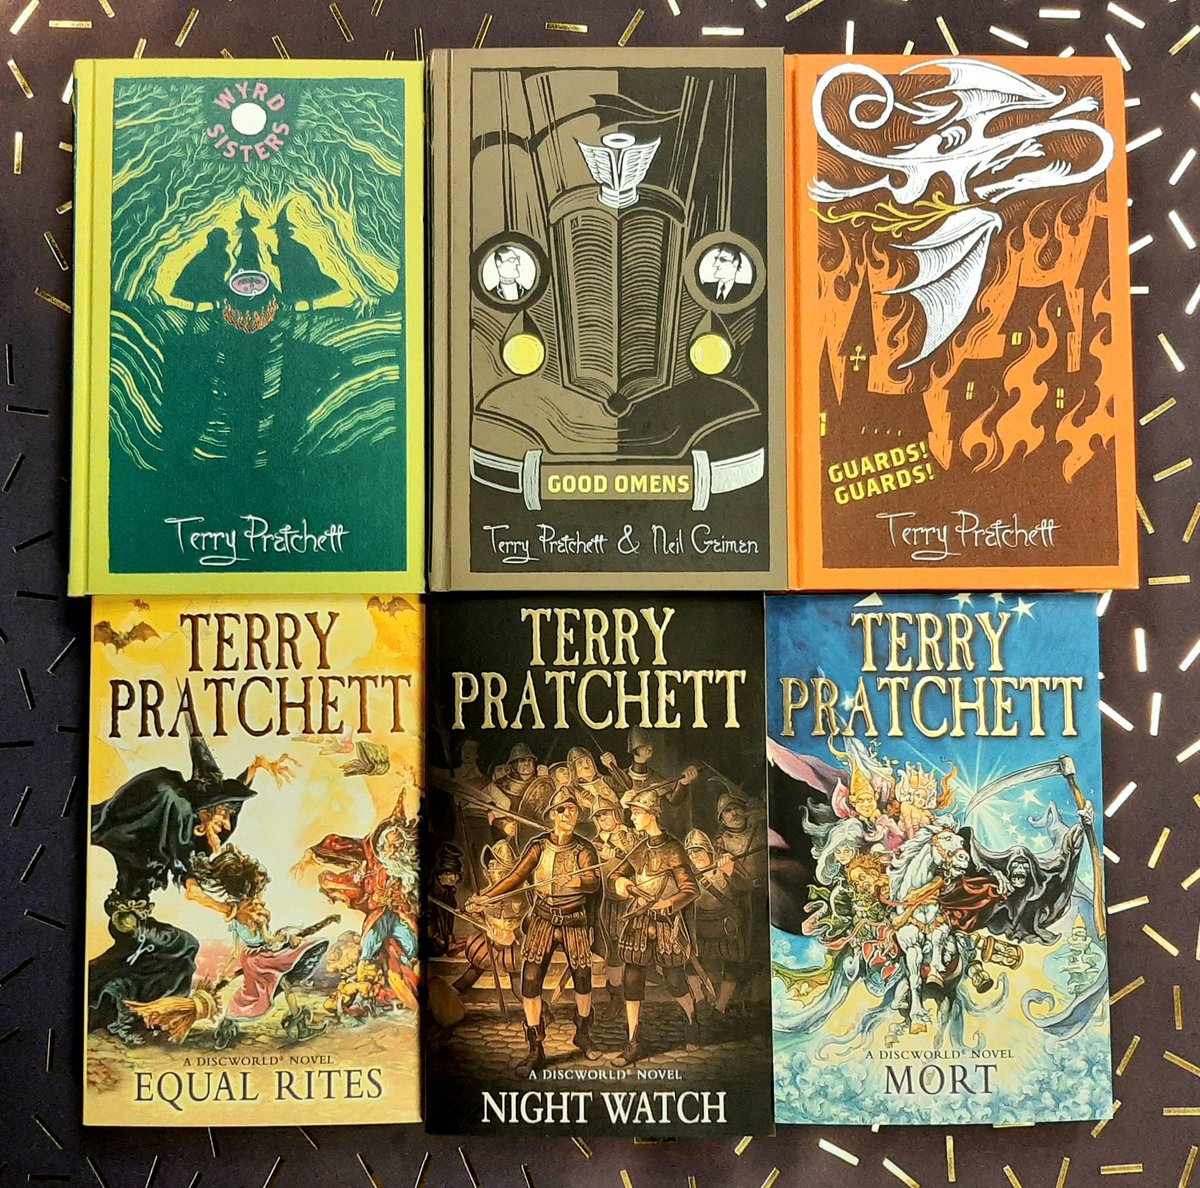 Happy #TerryPratchettDay!

All his books are brilliant in different ways, so it's hard to choose just one favourite.

So here are a few of our staff faves, What's yours?